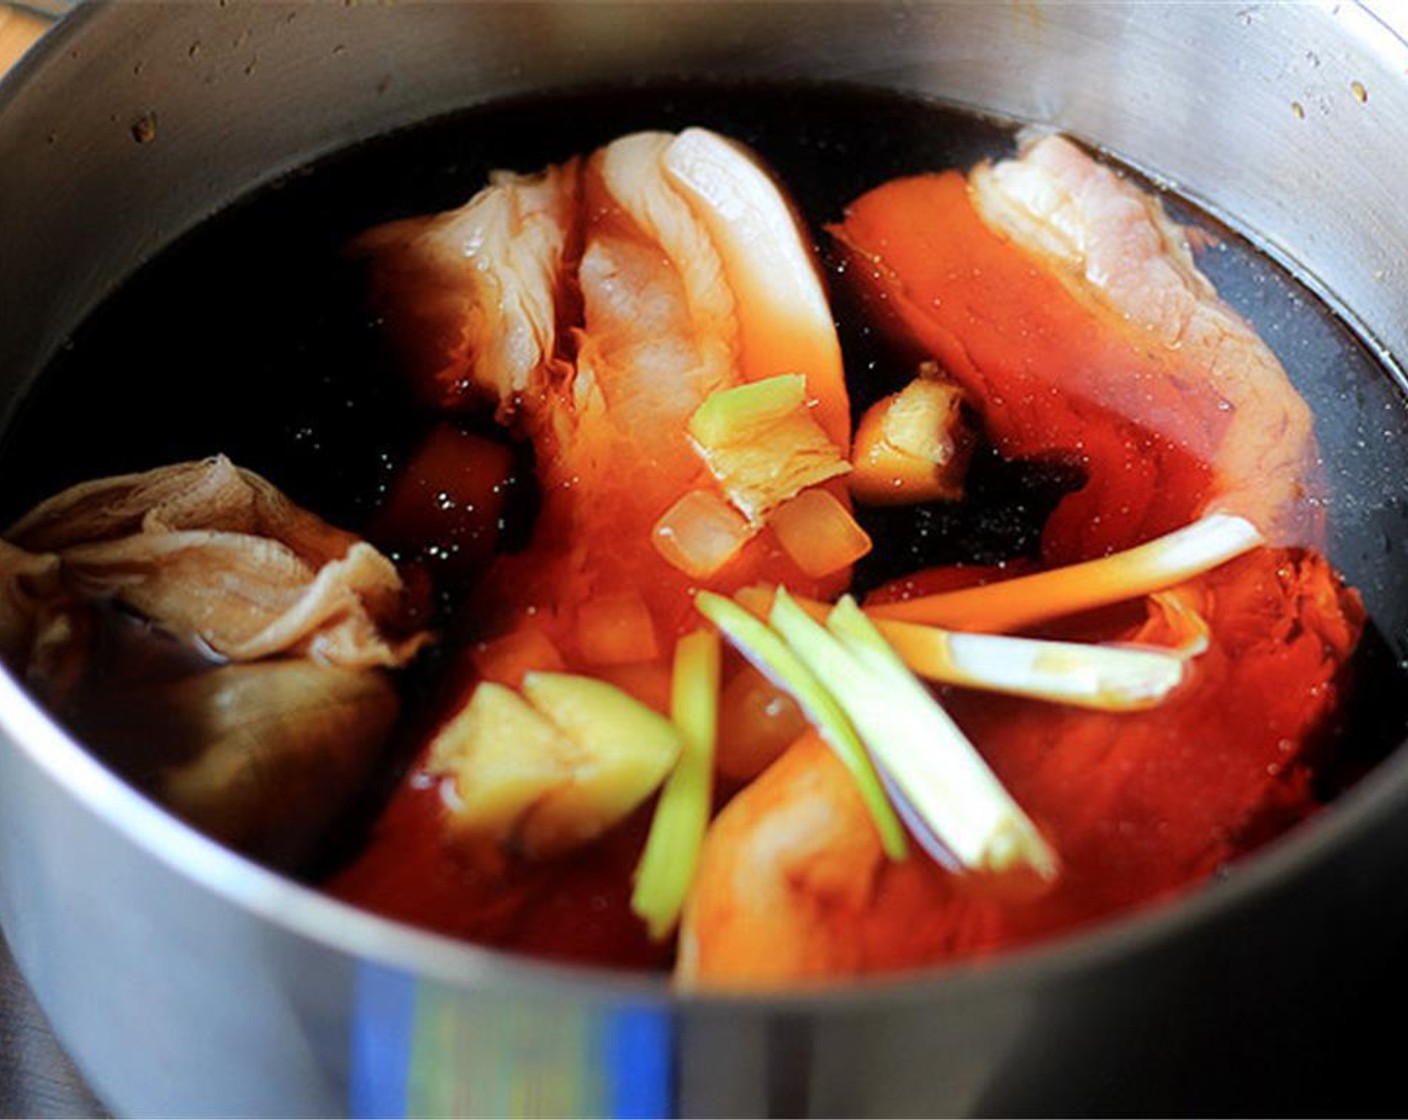 step 3 In a pot, add pork belly, the spice bag, Fresh Ginger (1 in), Crystal Sugar (1 Tbsp), Scallion (1 bunch), Salt (1 tsp) and Dark Soy Sauce (3 Tbsp). Pour in enough Water (to taste) to cover the pork belly. Bring to boiling then turn now the flame and simmer for 2 hours.